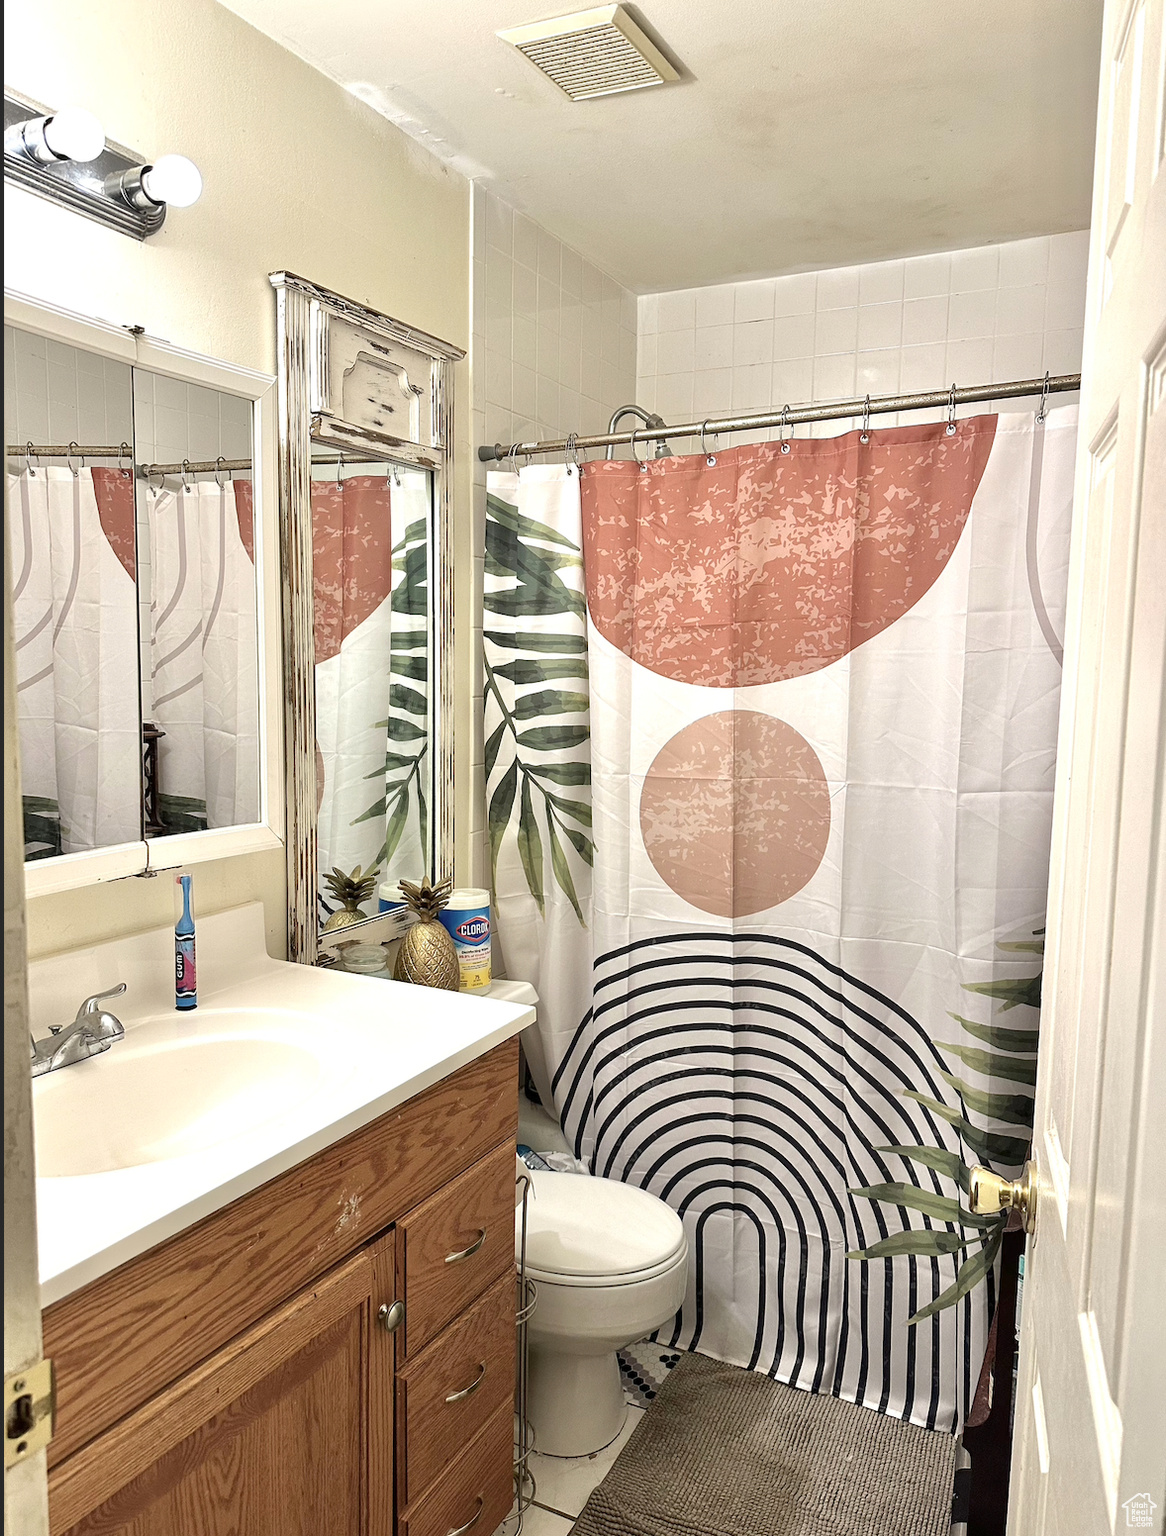 Bathroom with toilet, tile flooring, and oversized vanity